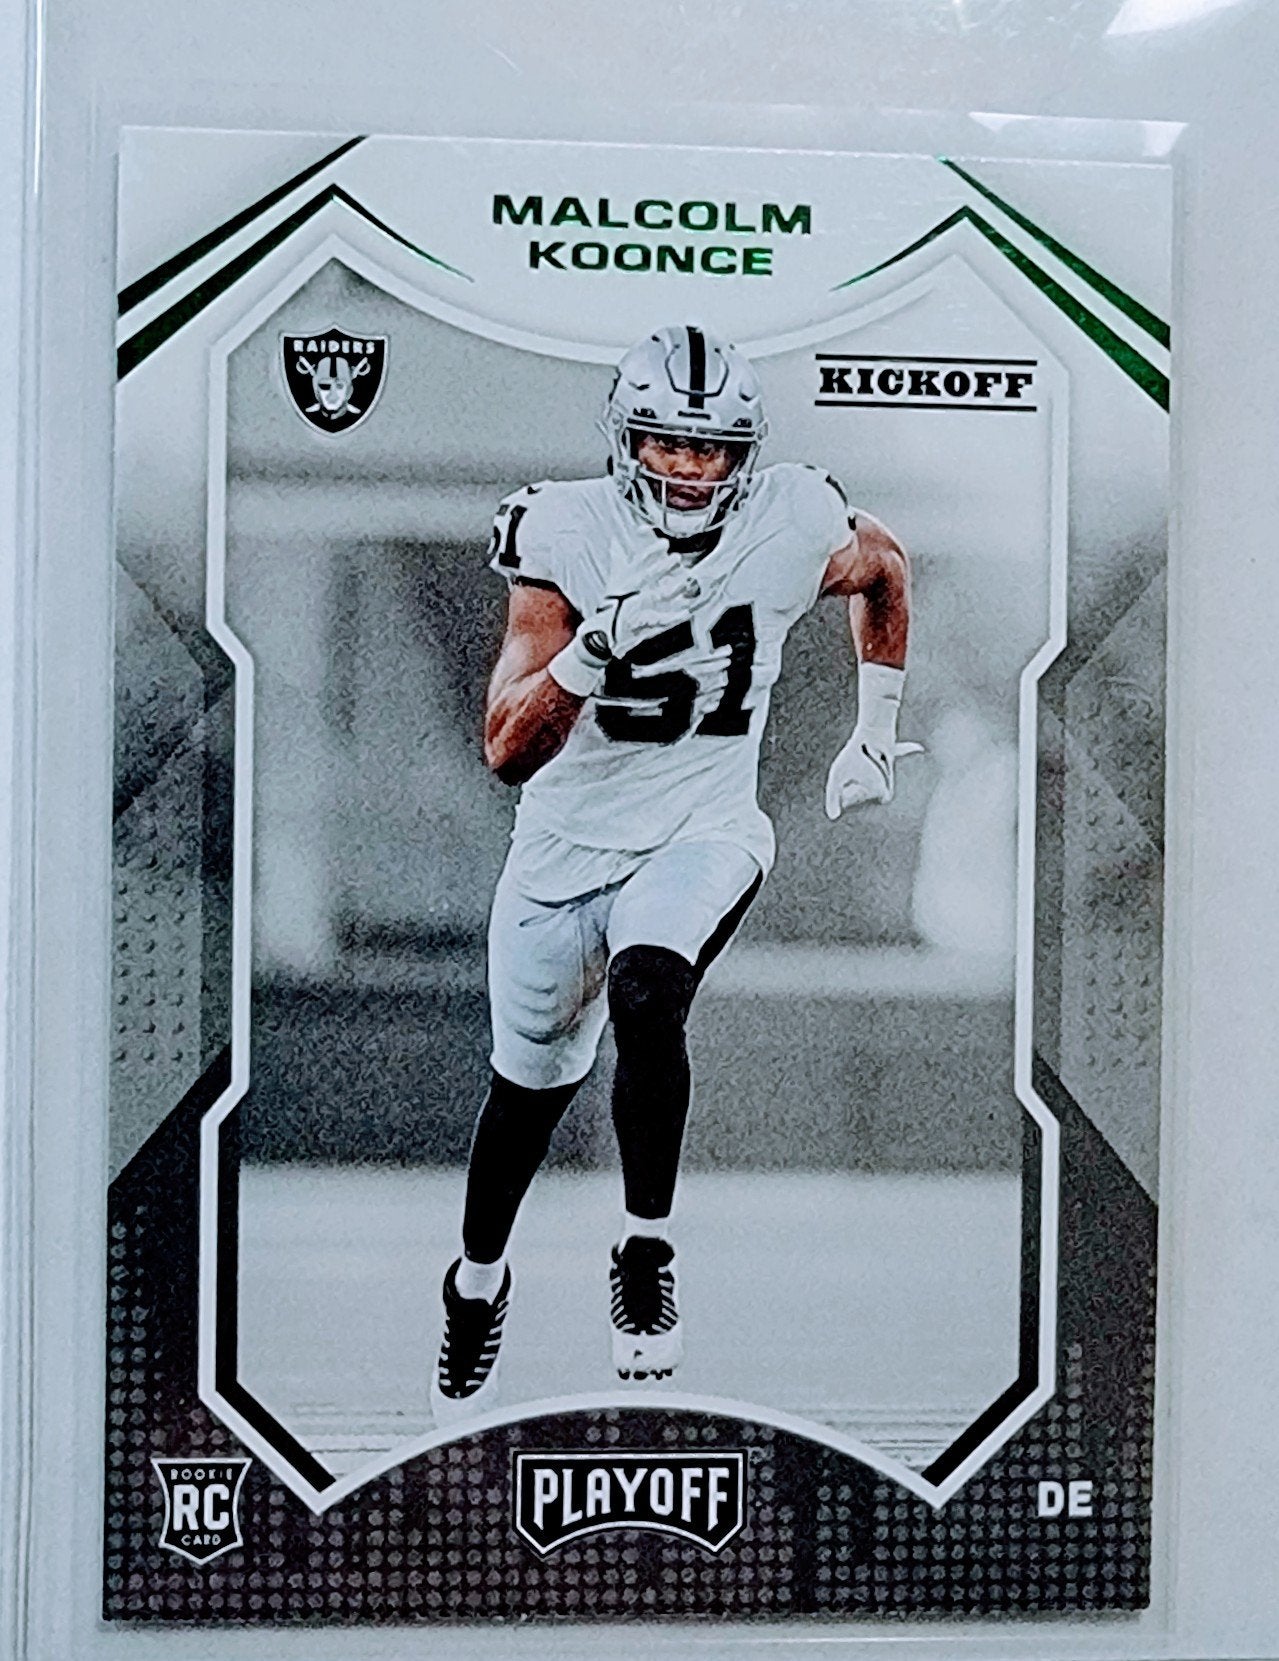 2021 Panini Playoff Malcolm Koonce Kickoff Insert Green Rookie Football Card AVM1 simple Xclusive Collectibles   